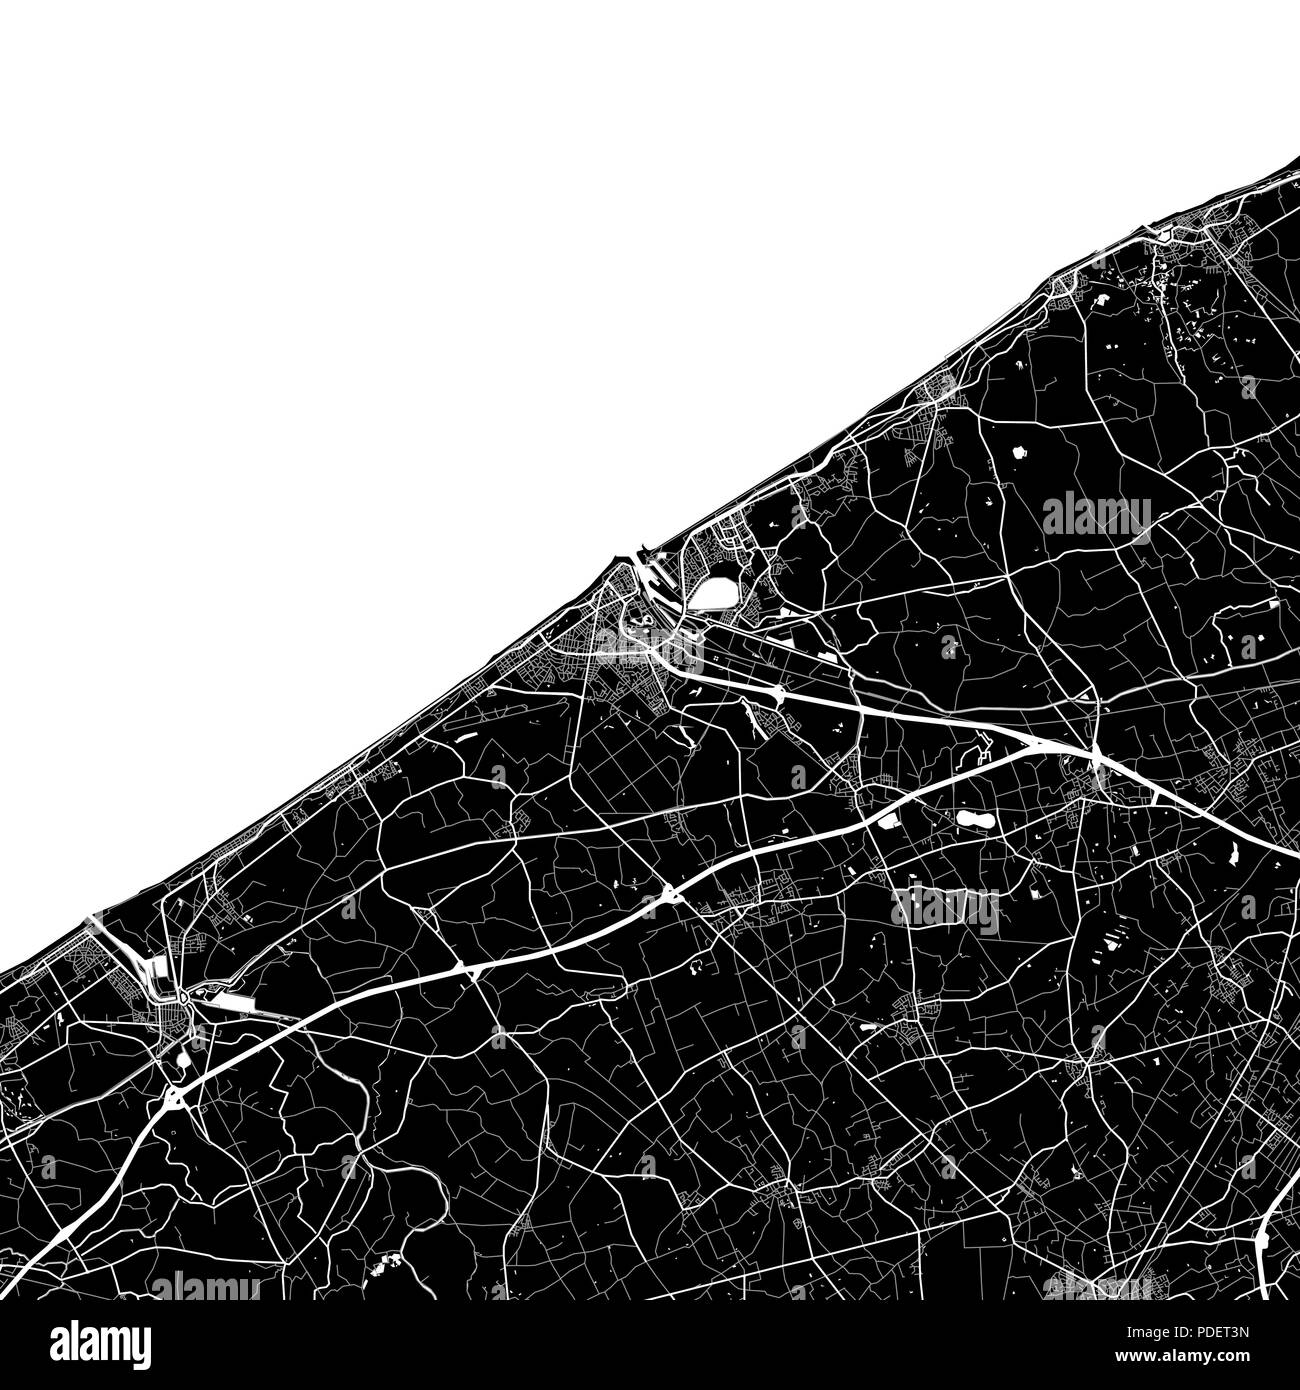 Area map of  Ostend, Belgium. Dark background version for infographic and marketing. This map of  Ostend, Flemish Region, contains streets, waterways  Stock Vector